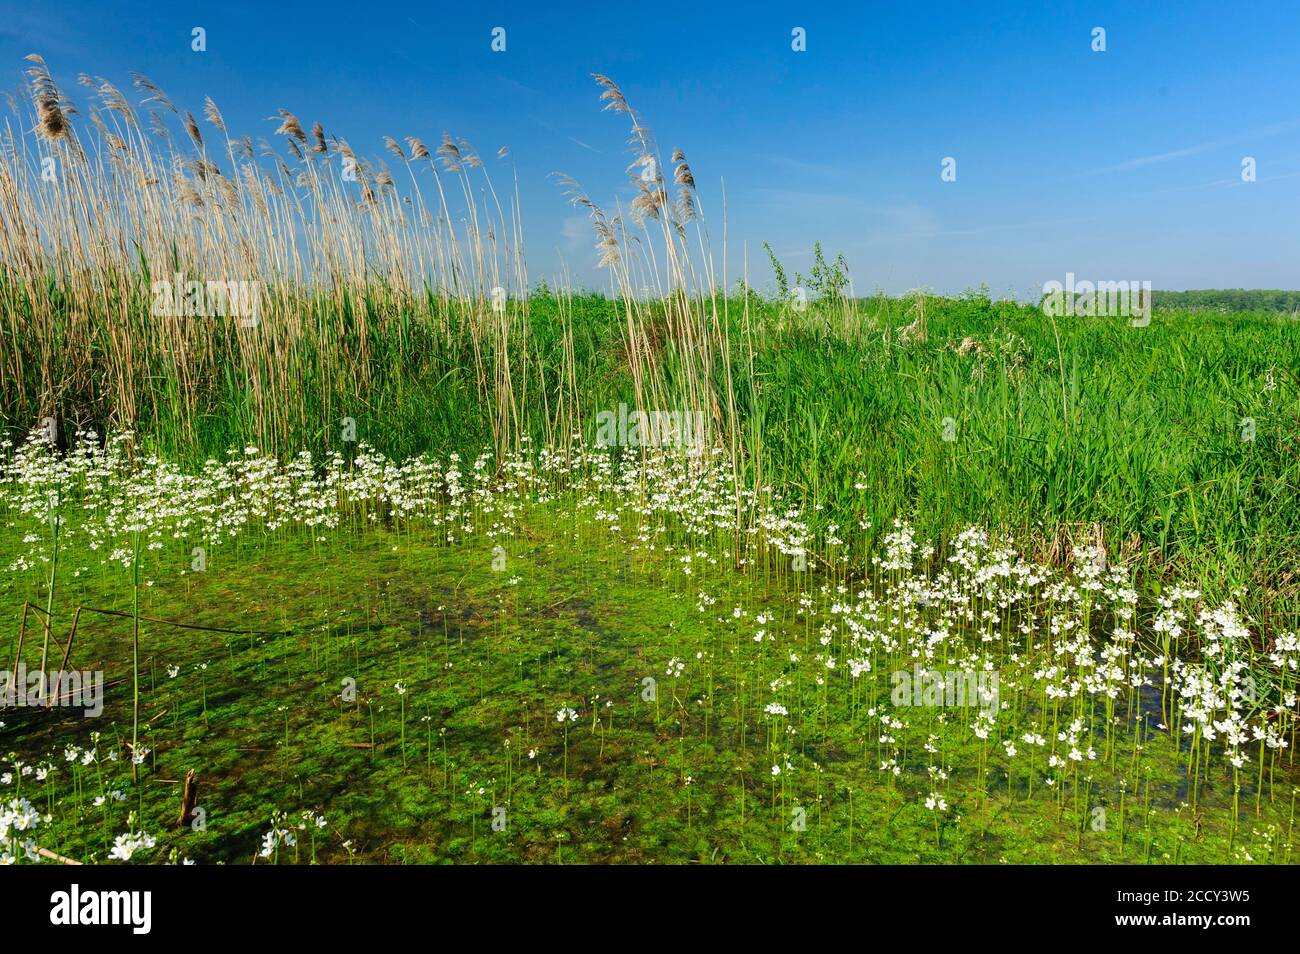 Common water buttercup (Ranunculus aquatilis L.) flowering in a ditch in the oxbog, swamp, wet meadows, dikes, herds, Lower Saxony, Germany Stock Photo